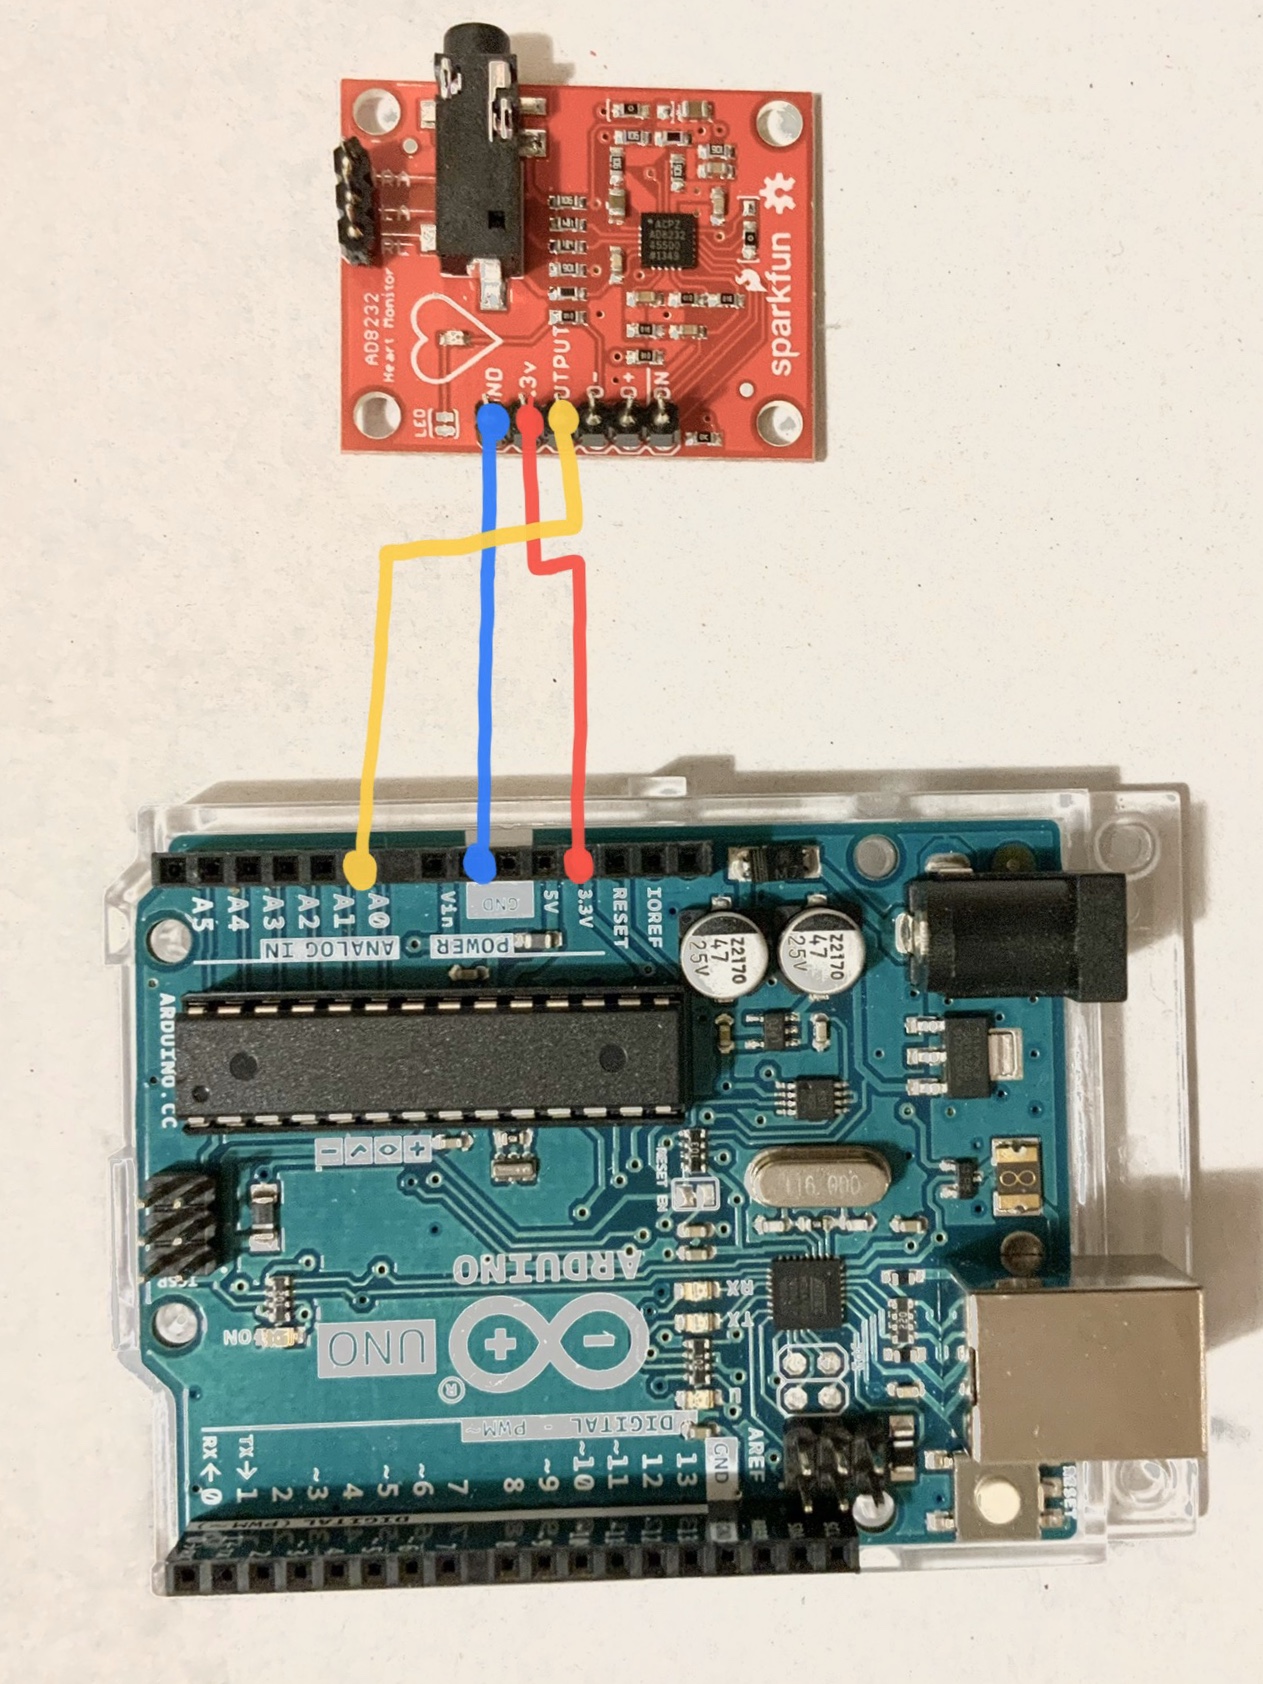 Connecting AD82332 to Arduino UNO